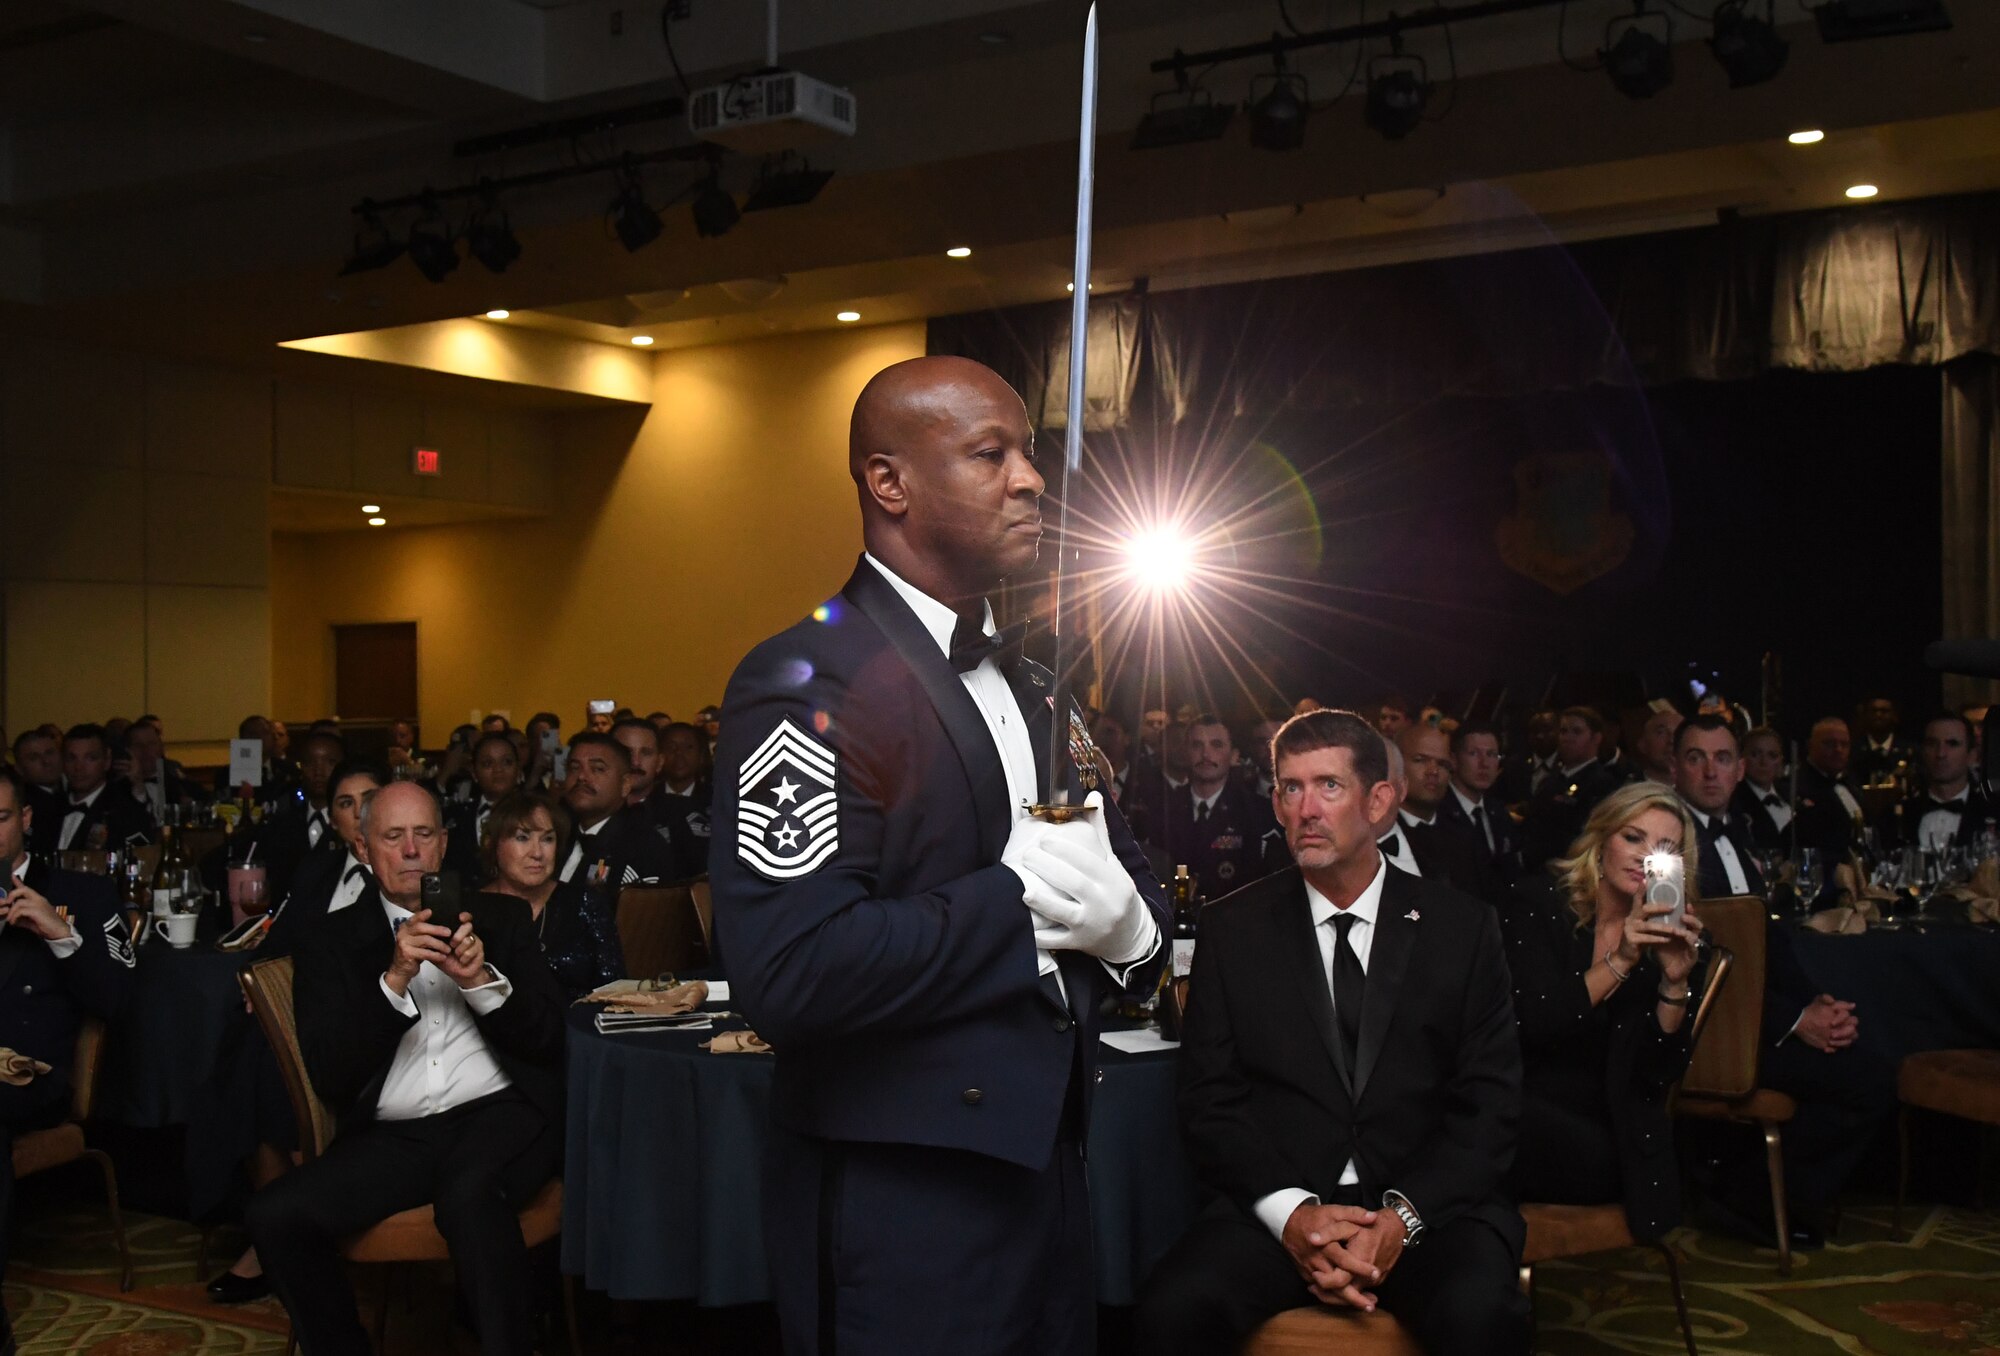 U.S. Air Force Chief Master Sgt. Antonio Cooper, 14th Flying Training Wing command chief, presents a commemorative sword while serving as the Sergeant at Arms during the Order of the Sword Ceremony at Keesler Air Force Base, Mississippi, Oct. 15, 2022